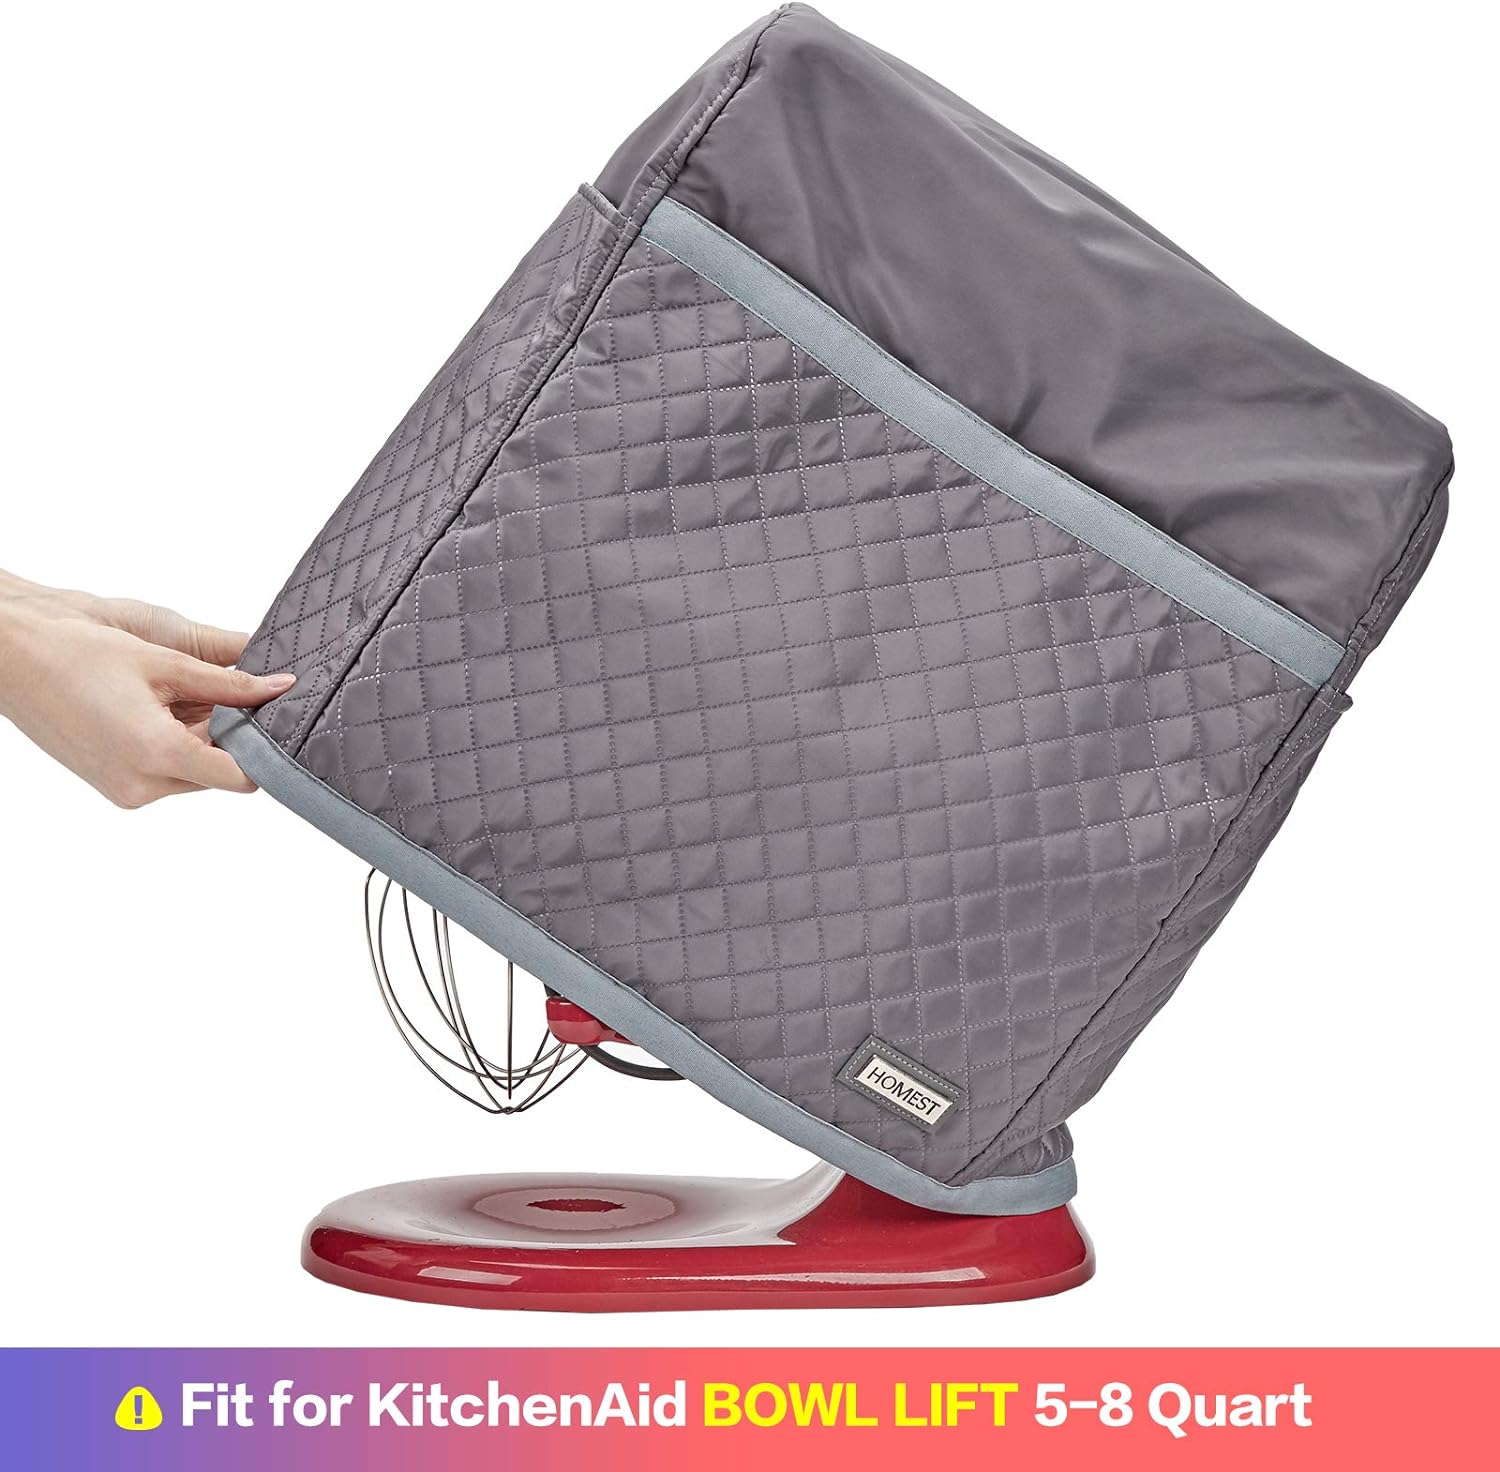 HOMEST Stand Mixer Quilted Dust Cover with Pockets Compatible with KitchenAid Bowl Lift 5-8 Quart, Grey (Patent Design)